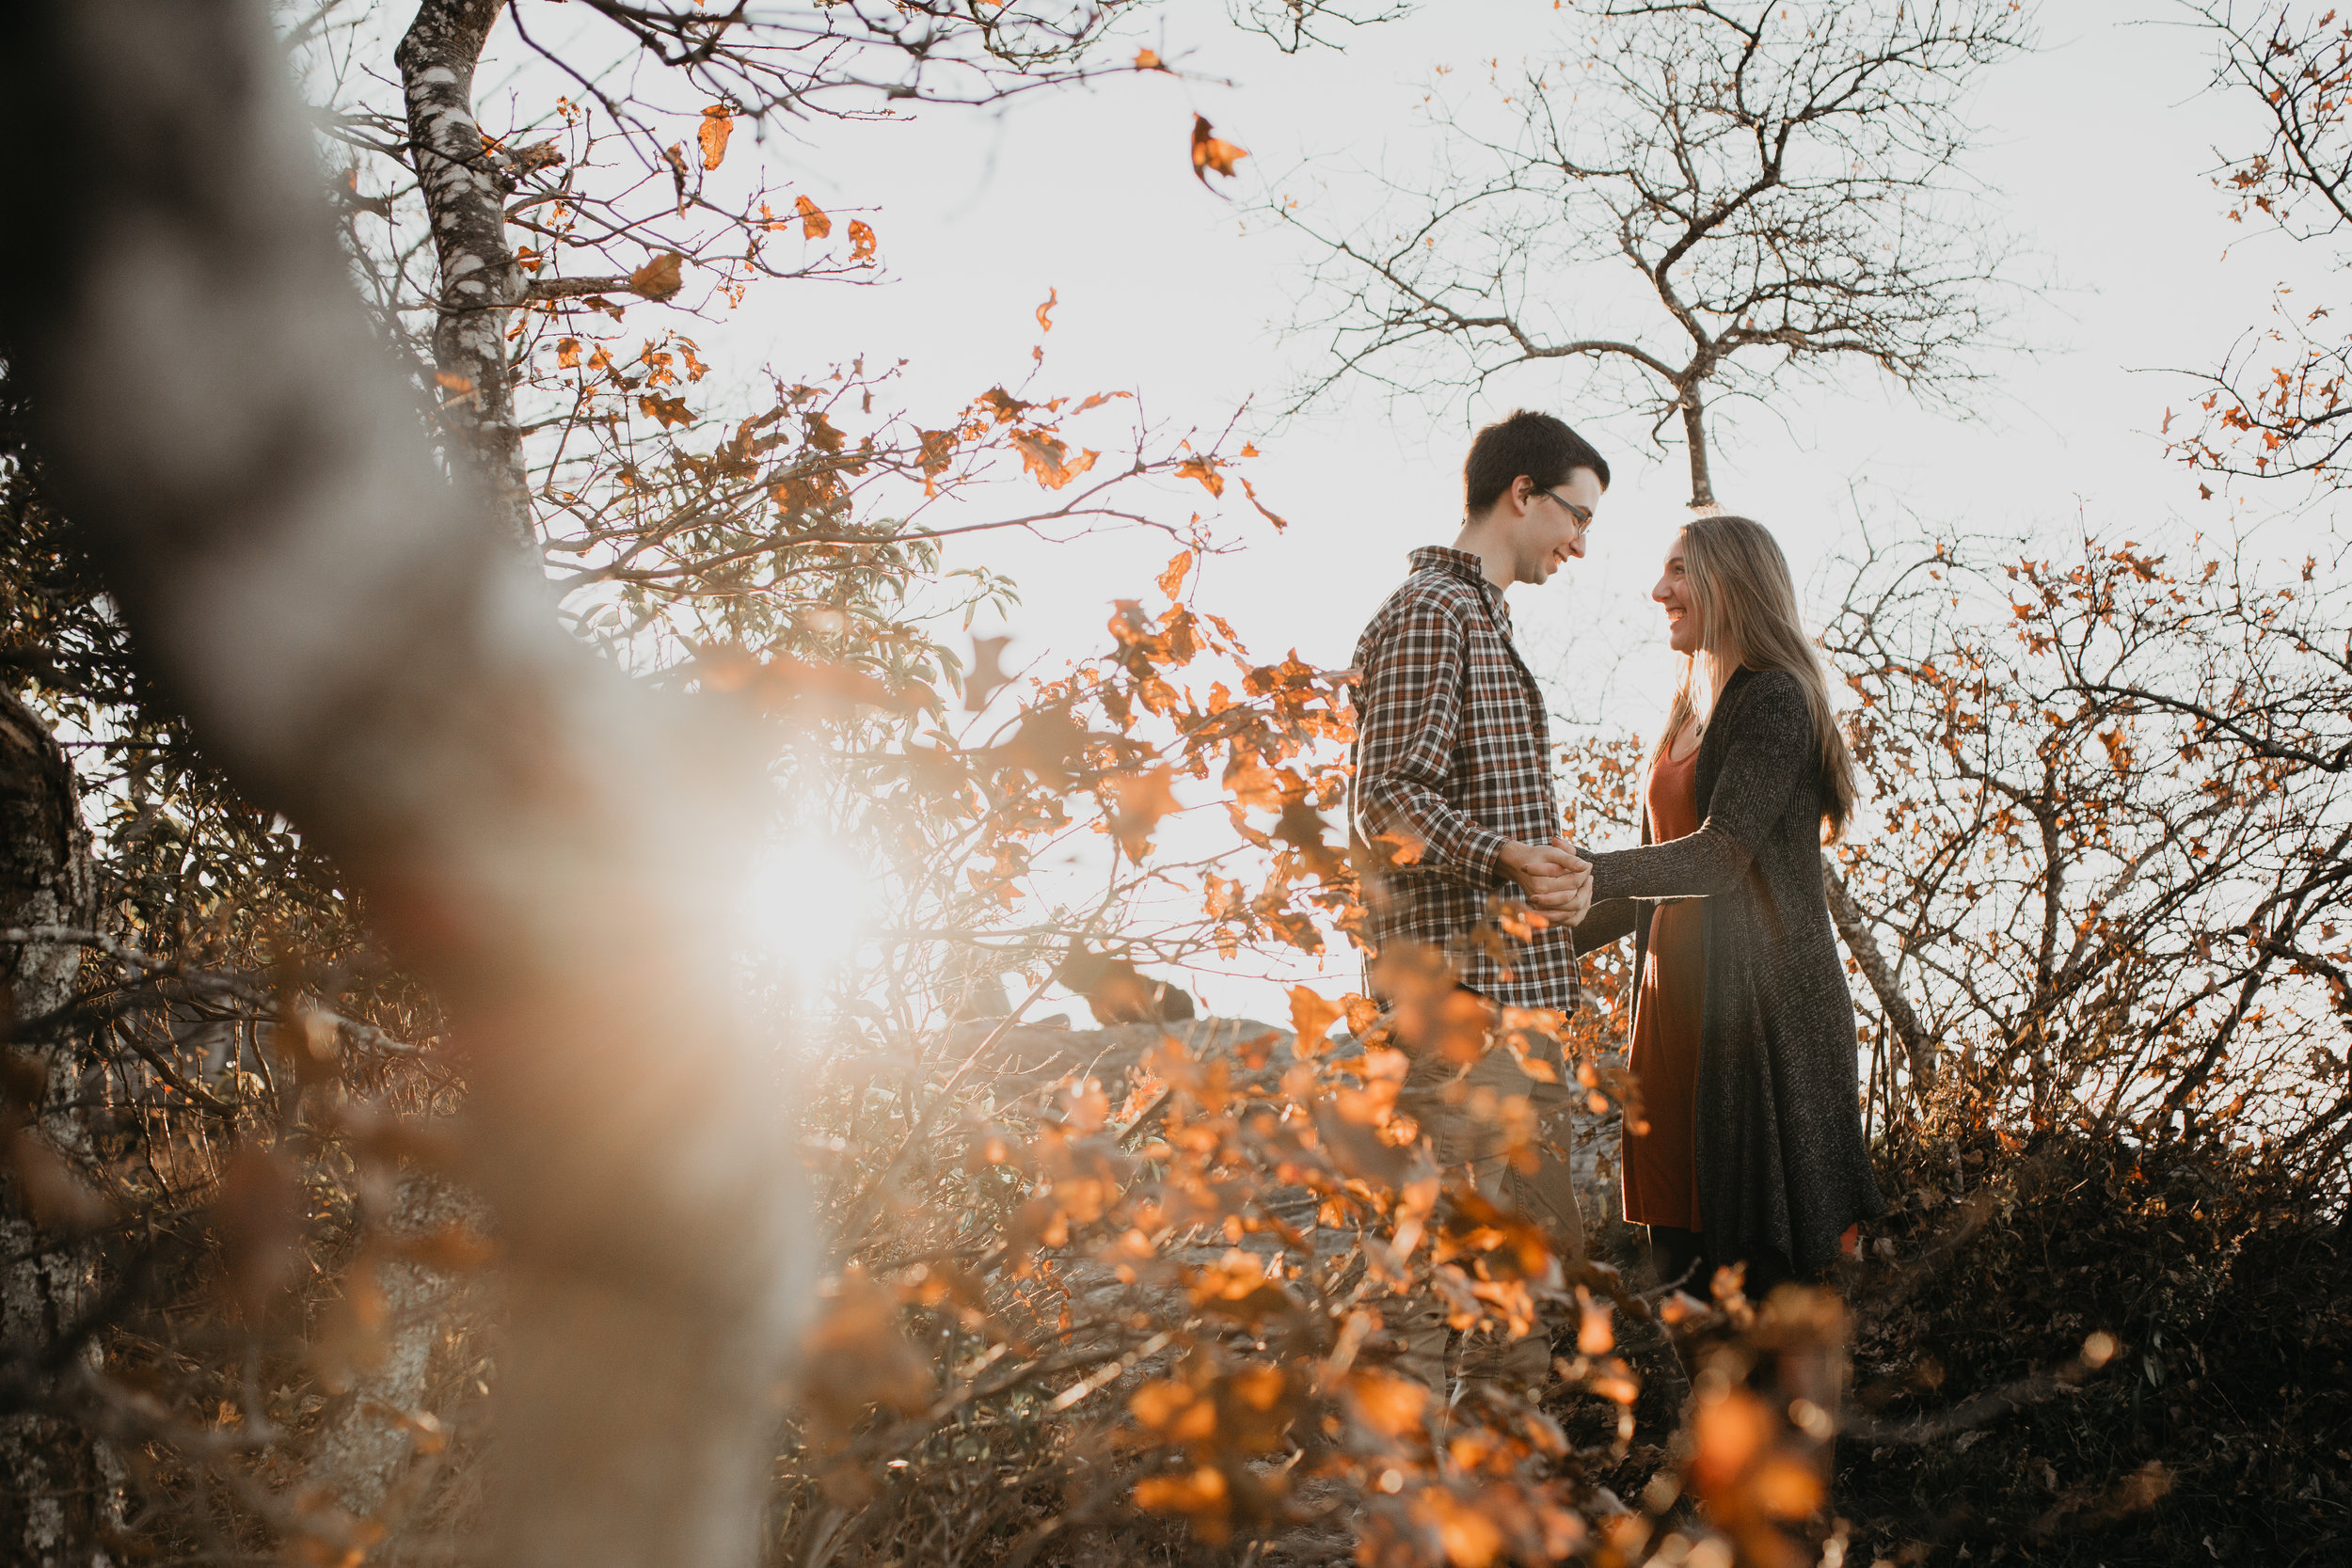 nicole-daacke-photography-shenandoah-national-park-adventure-engagement-session-with-fall-foliage-shenandoah-elopement-photographer-engagement-photos-in-virginia-charlottesville-national-park-adventure-elopement-photographer-3690.jpg